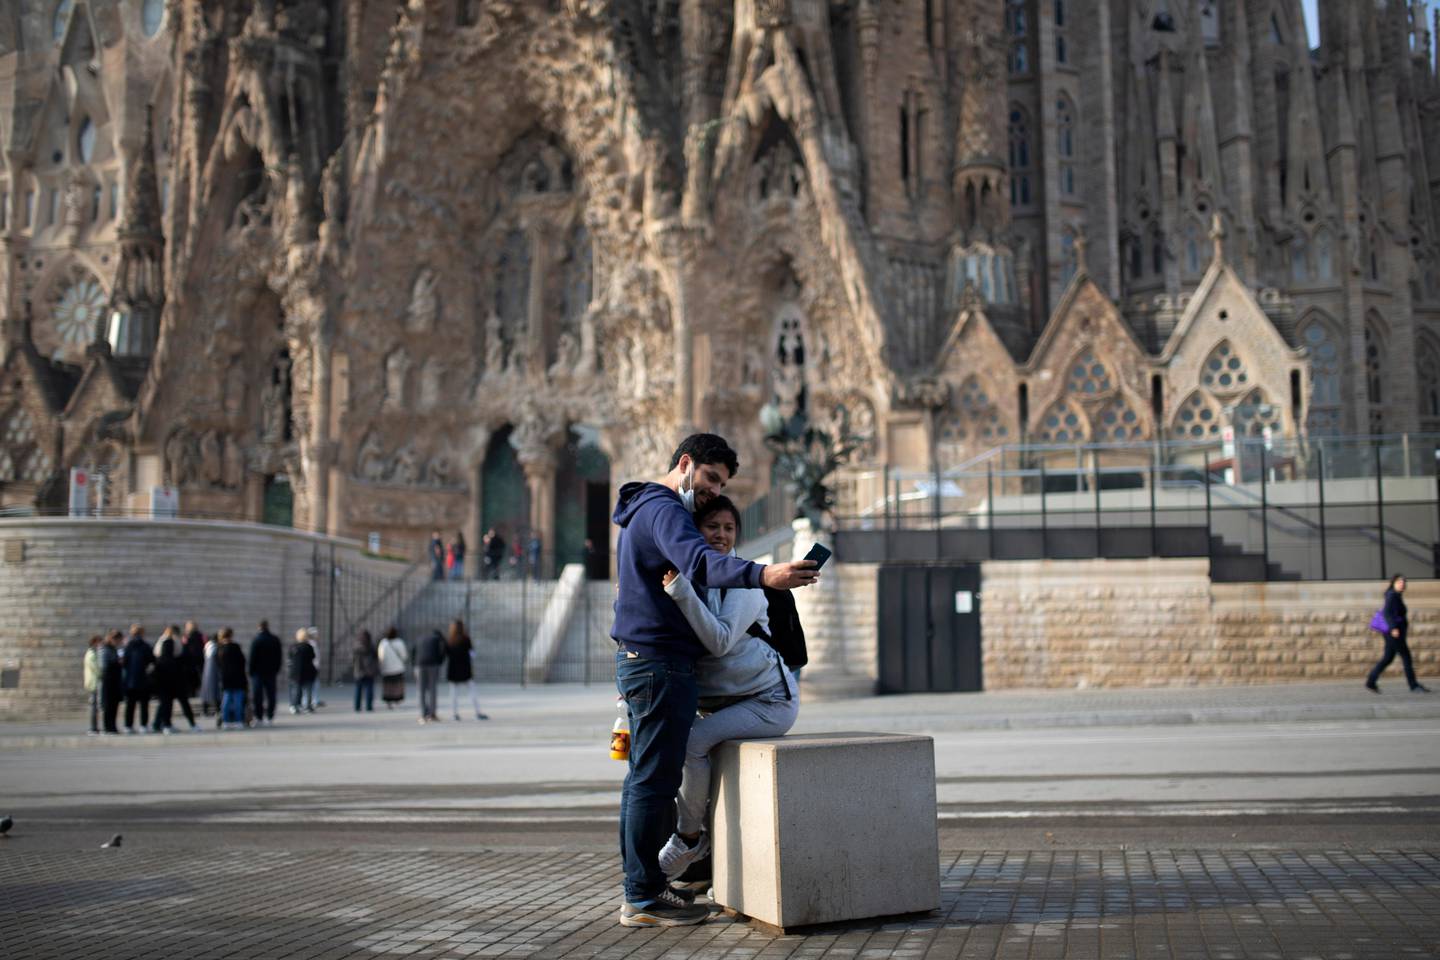 People take a selfie outside the Sagrada Familia basilica in Barcelona, Spain, Friday, March 13, 2020. The basilica closed its doors to visitors and suspend construction from Friday, March 13 to prevent the spread of the new COVID-19 coronavirus. Spain, along with Italy and France, is among the countries worst hit by the virus so far in Europe. For most people, the new coronavirus causes only mild or moderate symptoms. For some it can cause more severe illness. (AP Photo/Joan Mateu)